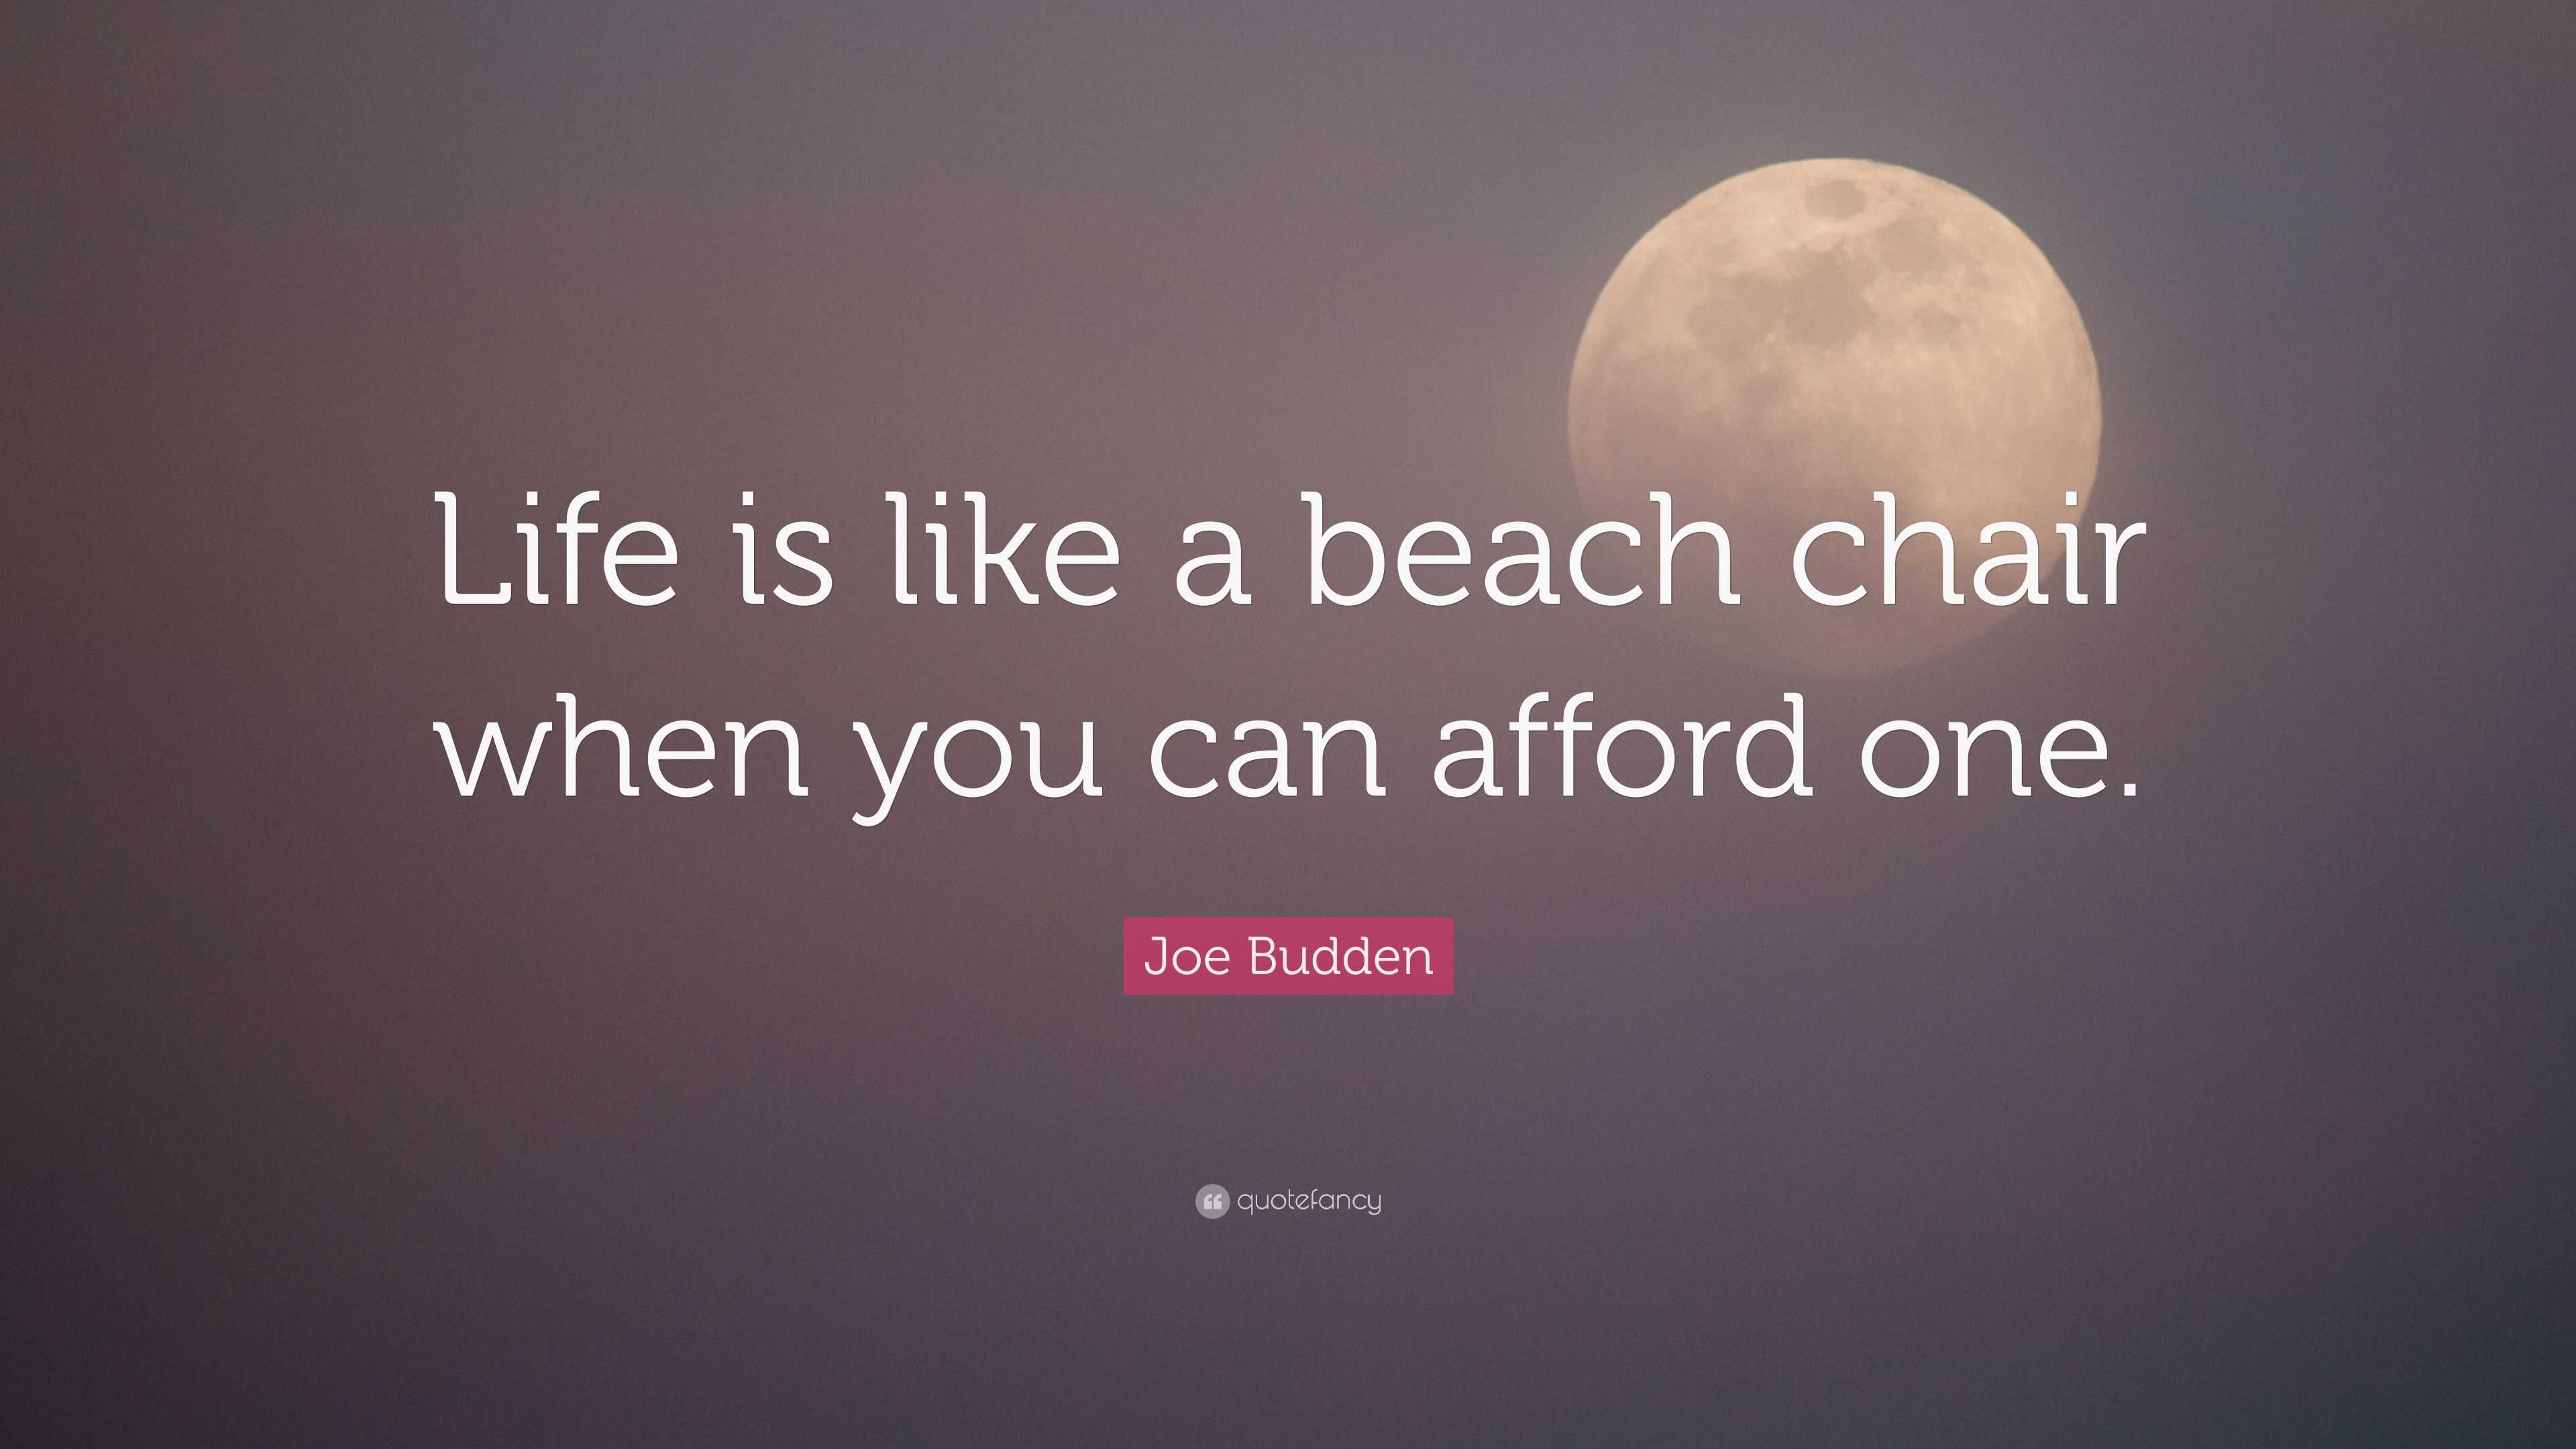 Joe Budden Quote Life Is Like A Beach Chair When You Can Afford